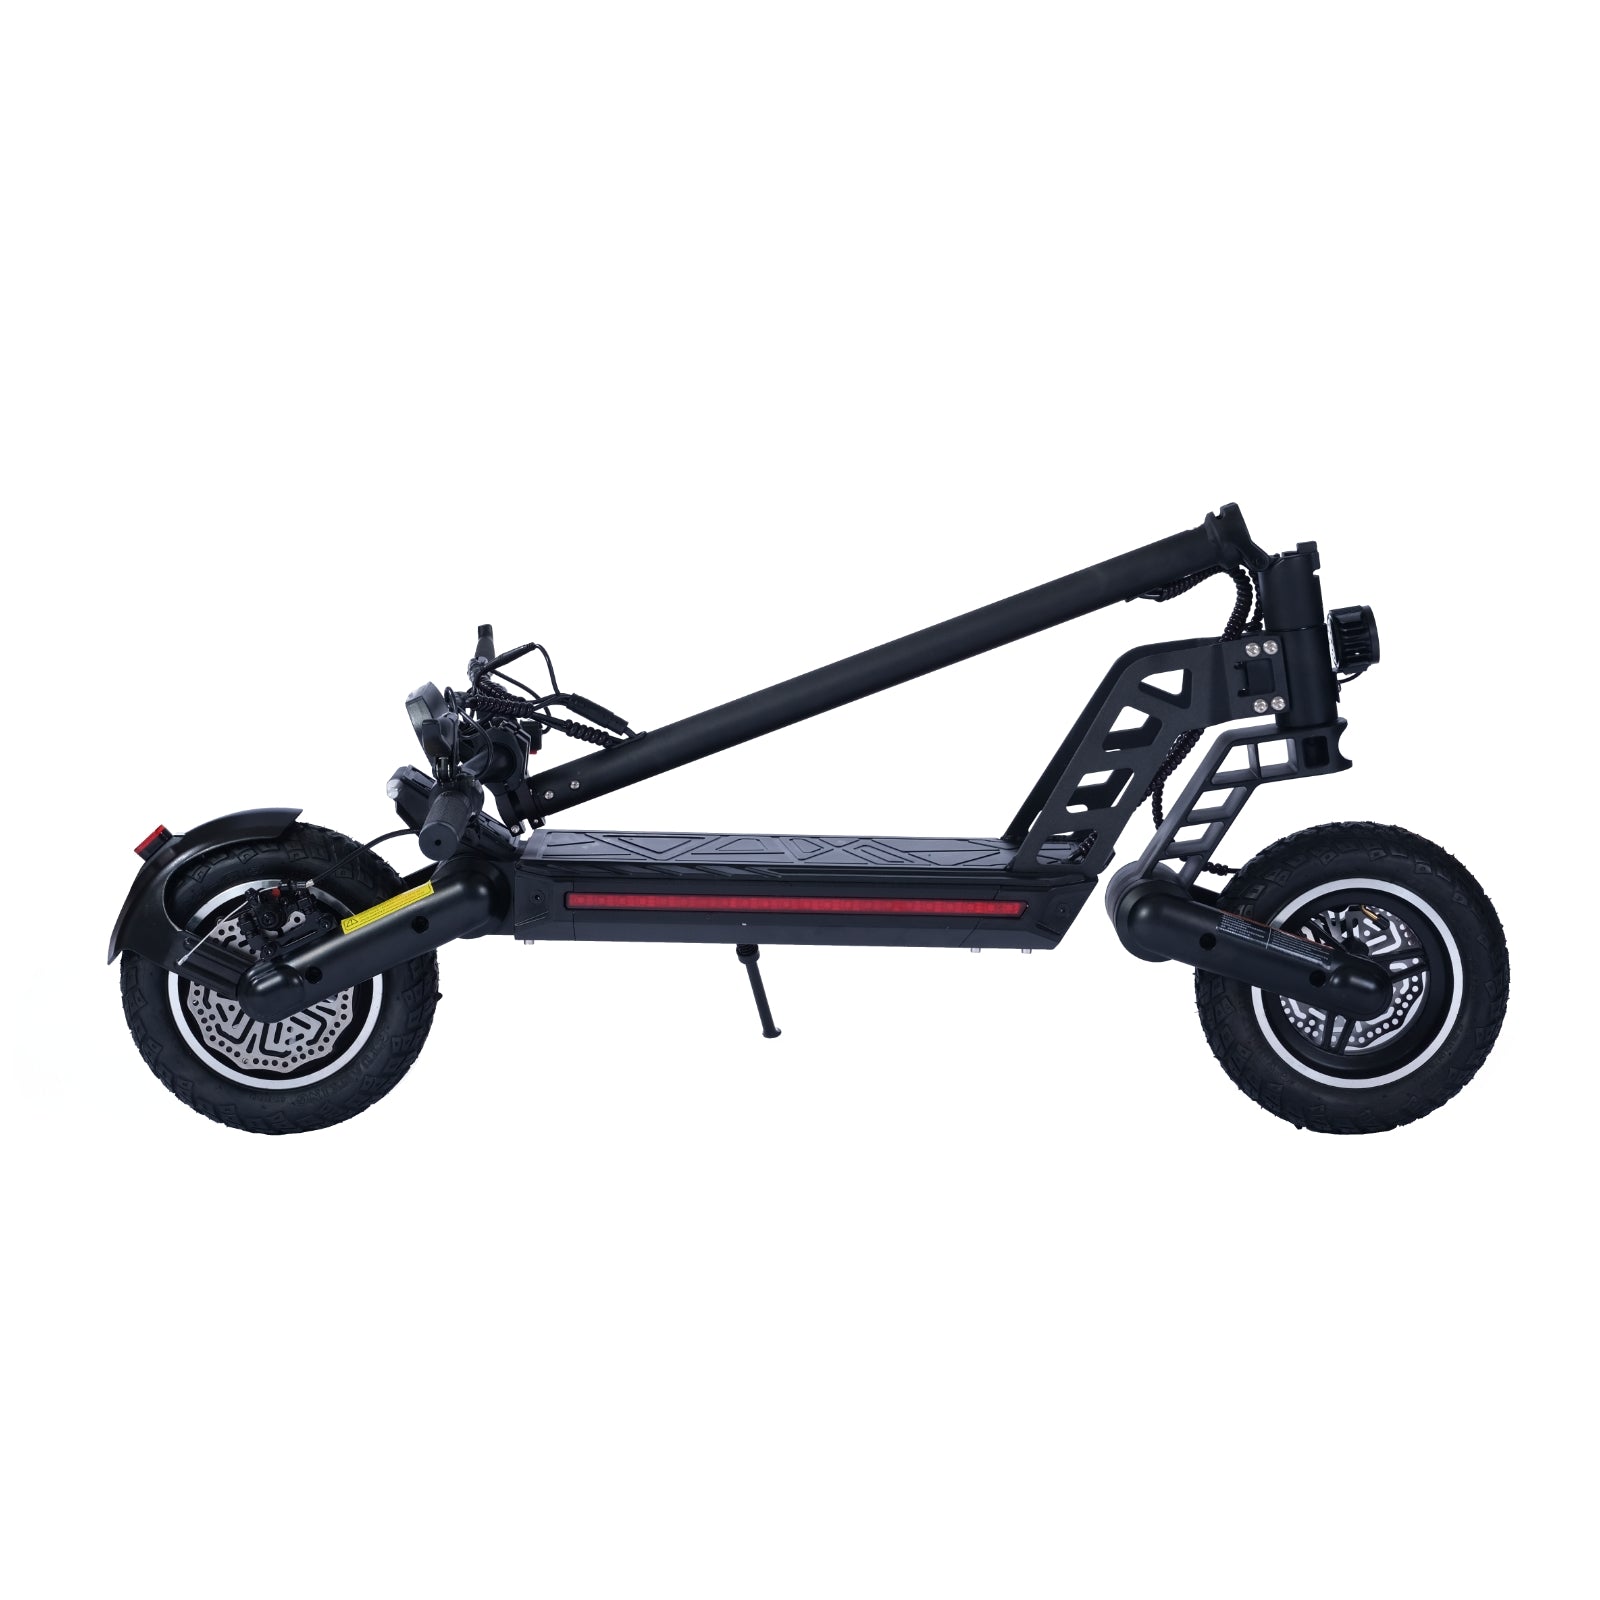 Buy Wholesale China Eu Au Ca Stock Kugoo G2 Max New Version 1500w 21ah  Battery Scooter Eléctricos Top Speed 55km/h 10 Inch Electric Scooters Off  Road & Electric Scooters at USD 439